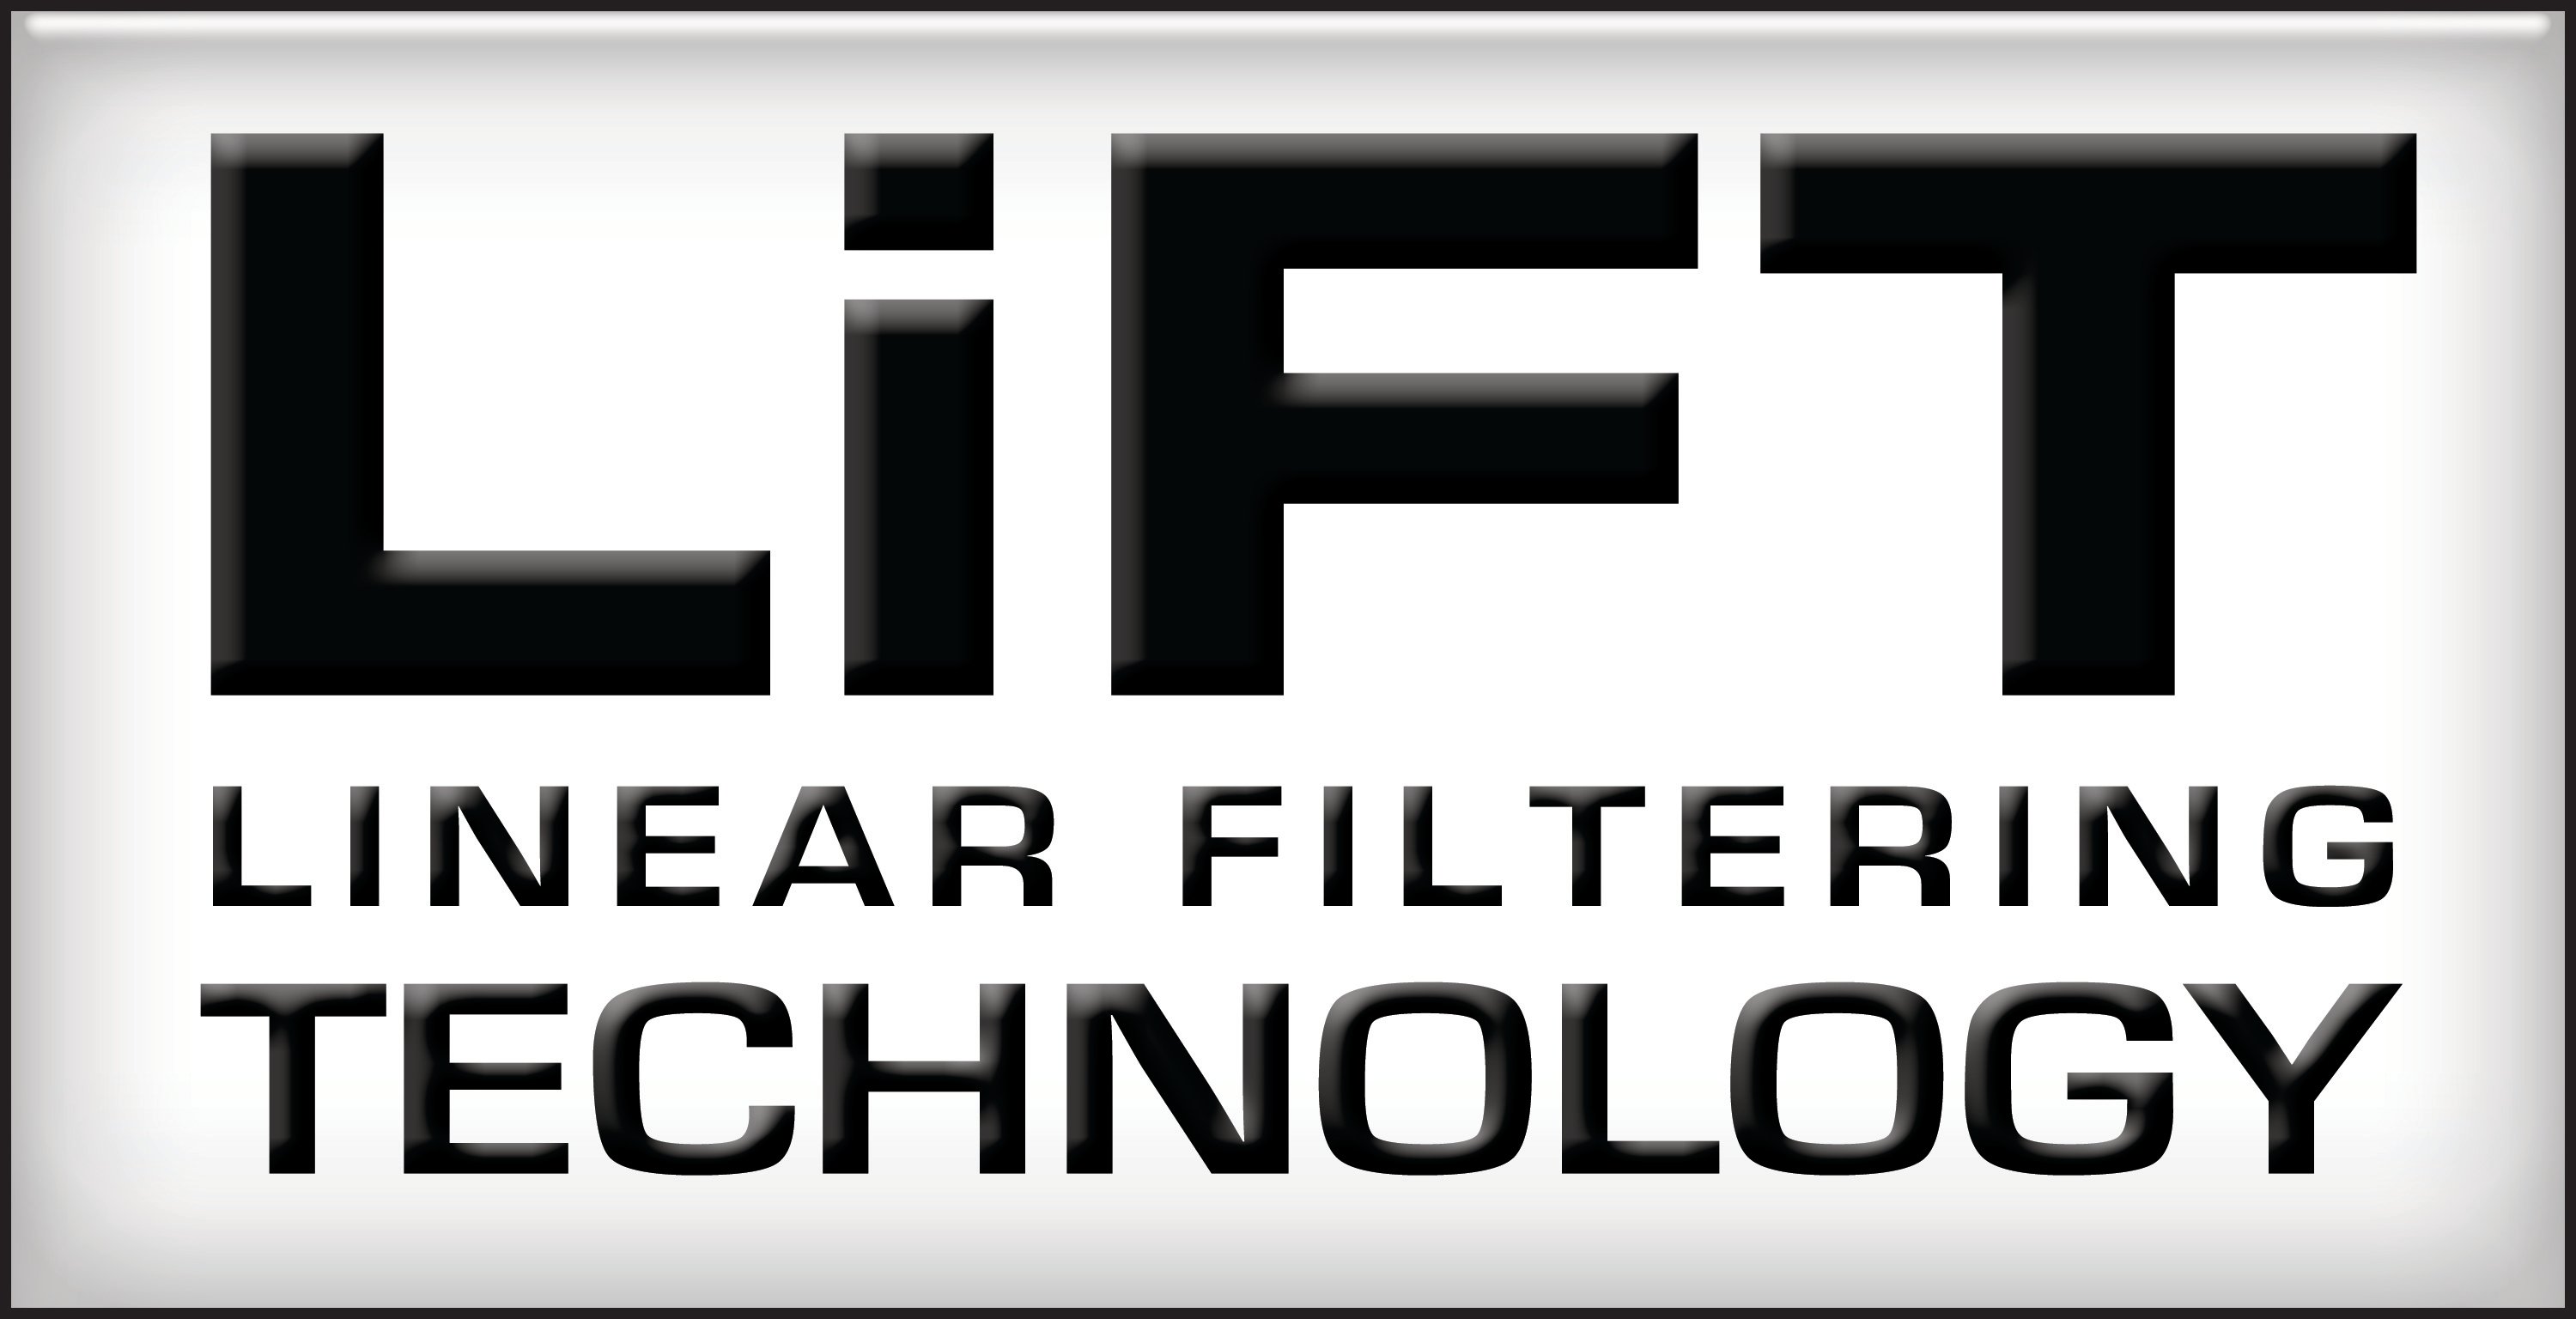 LiFT (Linear Filtering Technology) icon